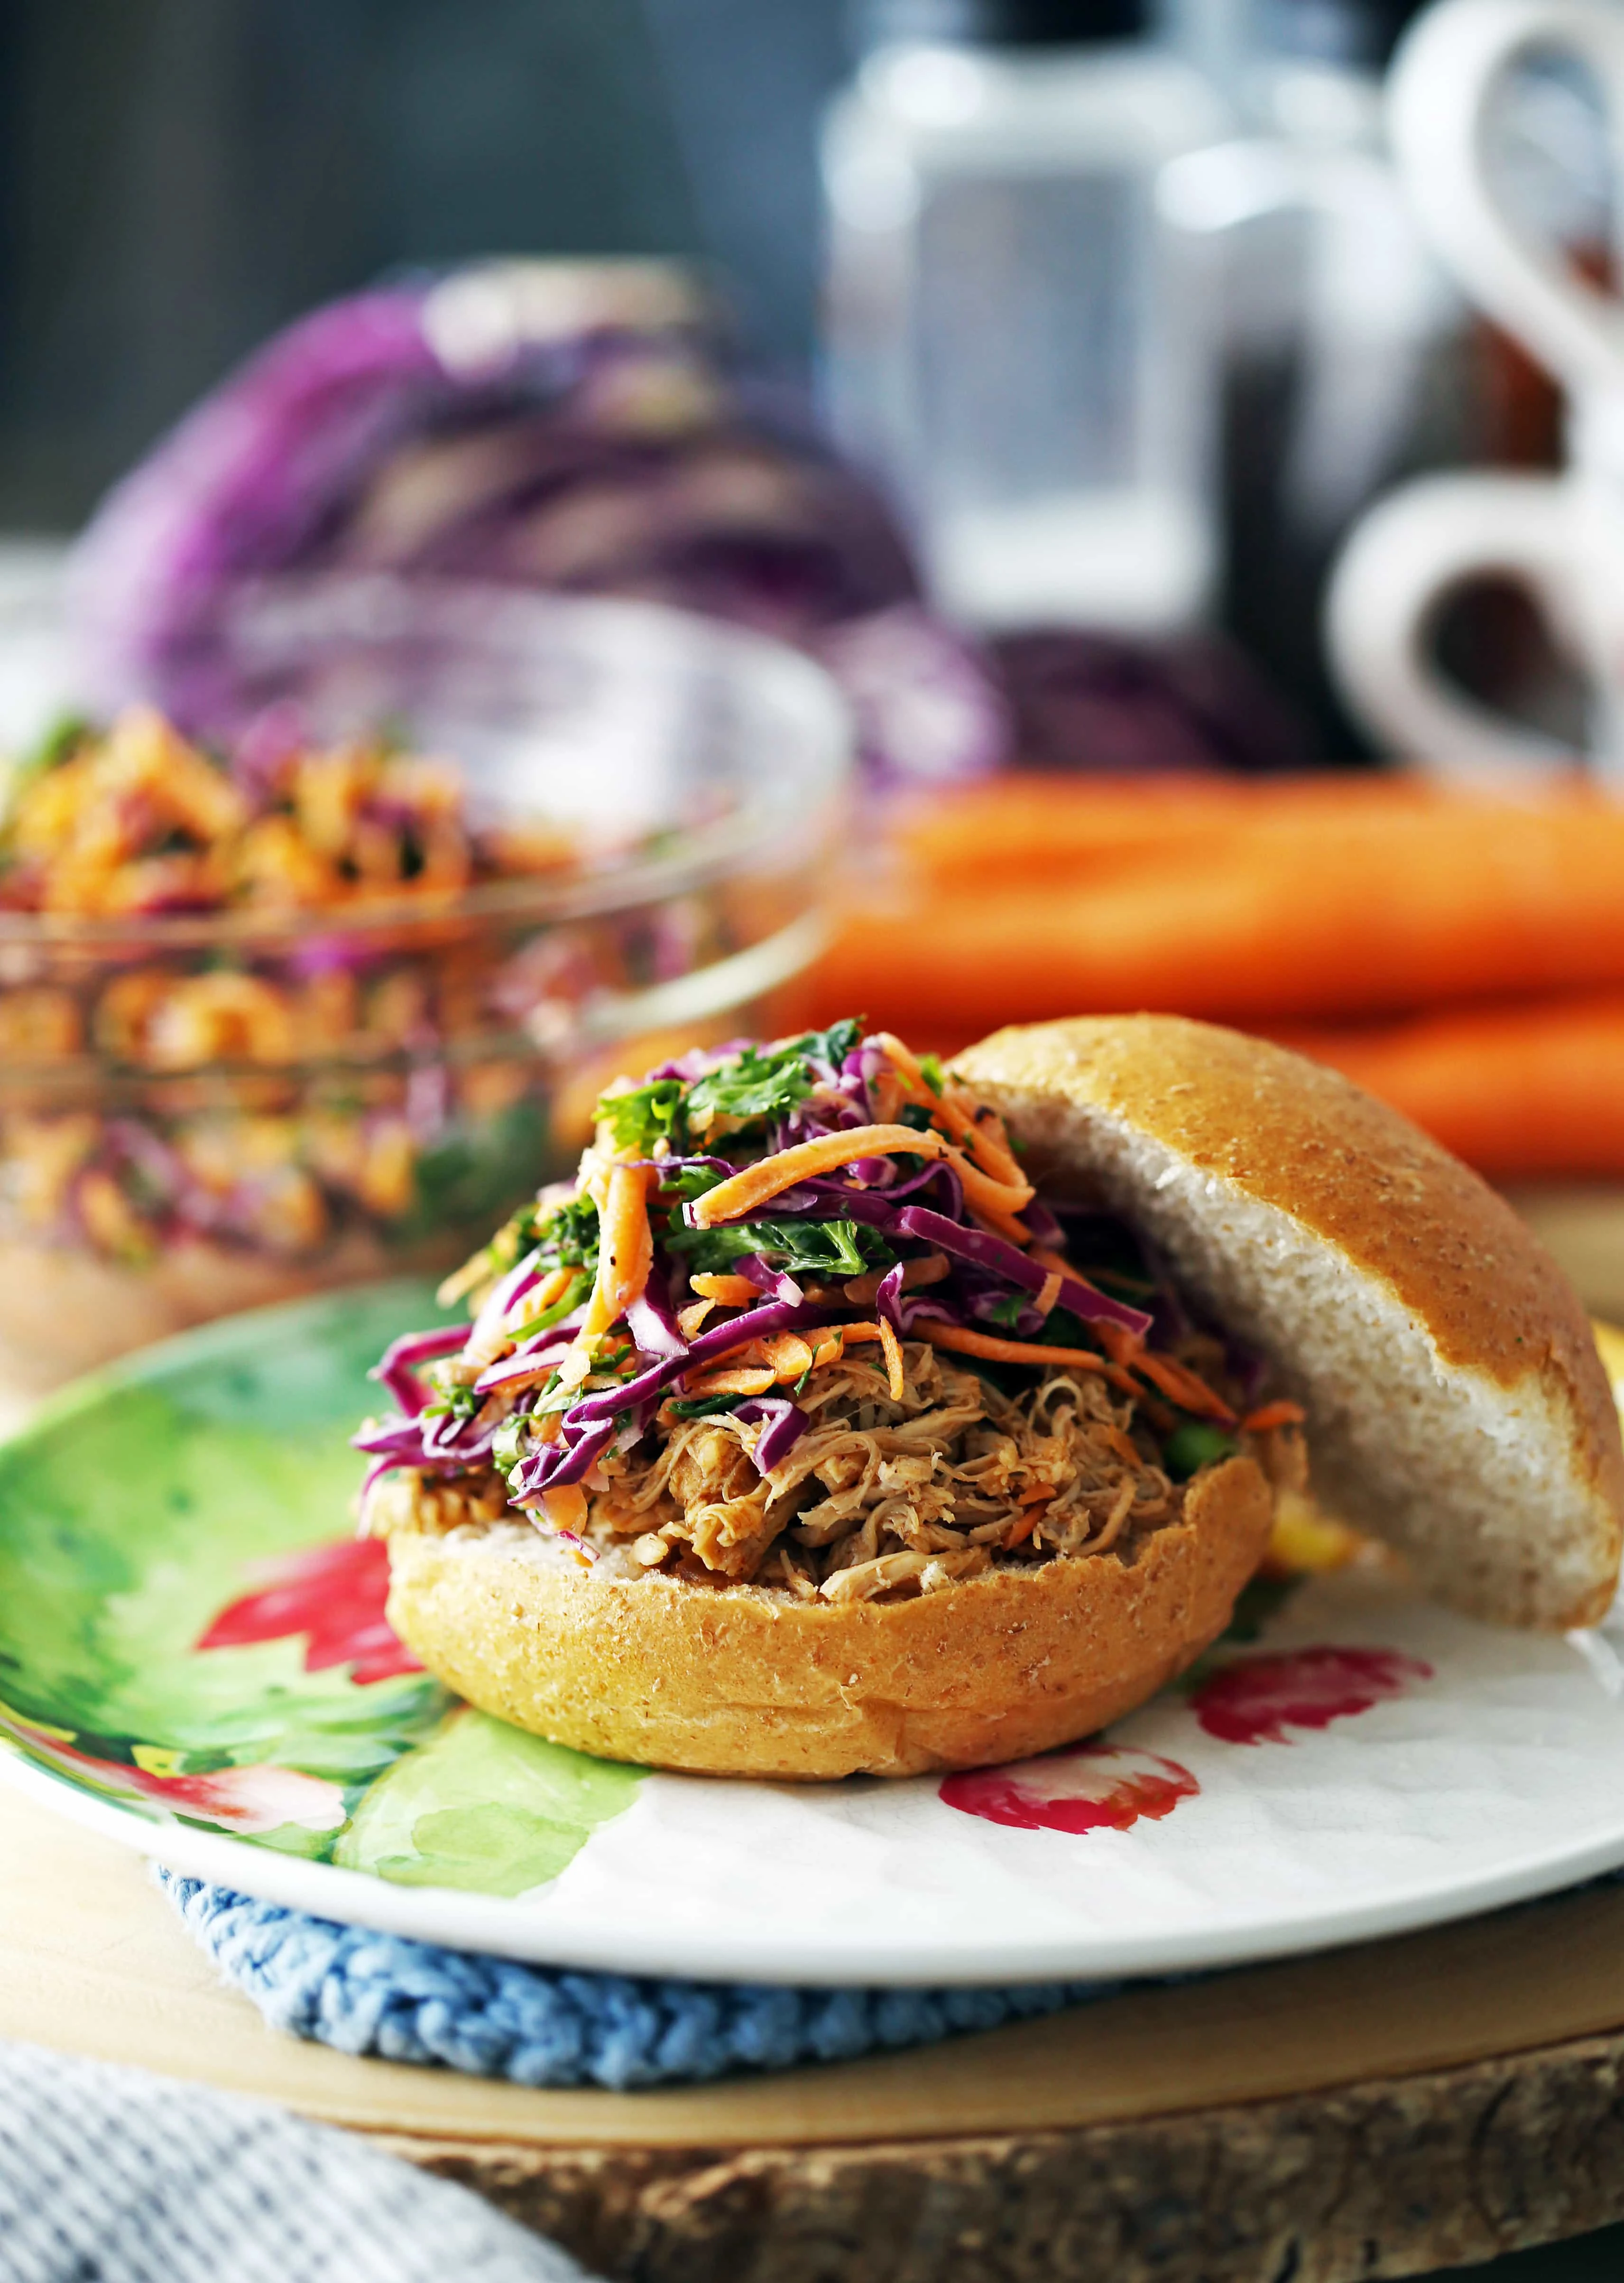 A side view of shredded chicken burger with healthy carrot cabbage slaw topping.